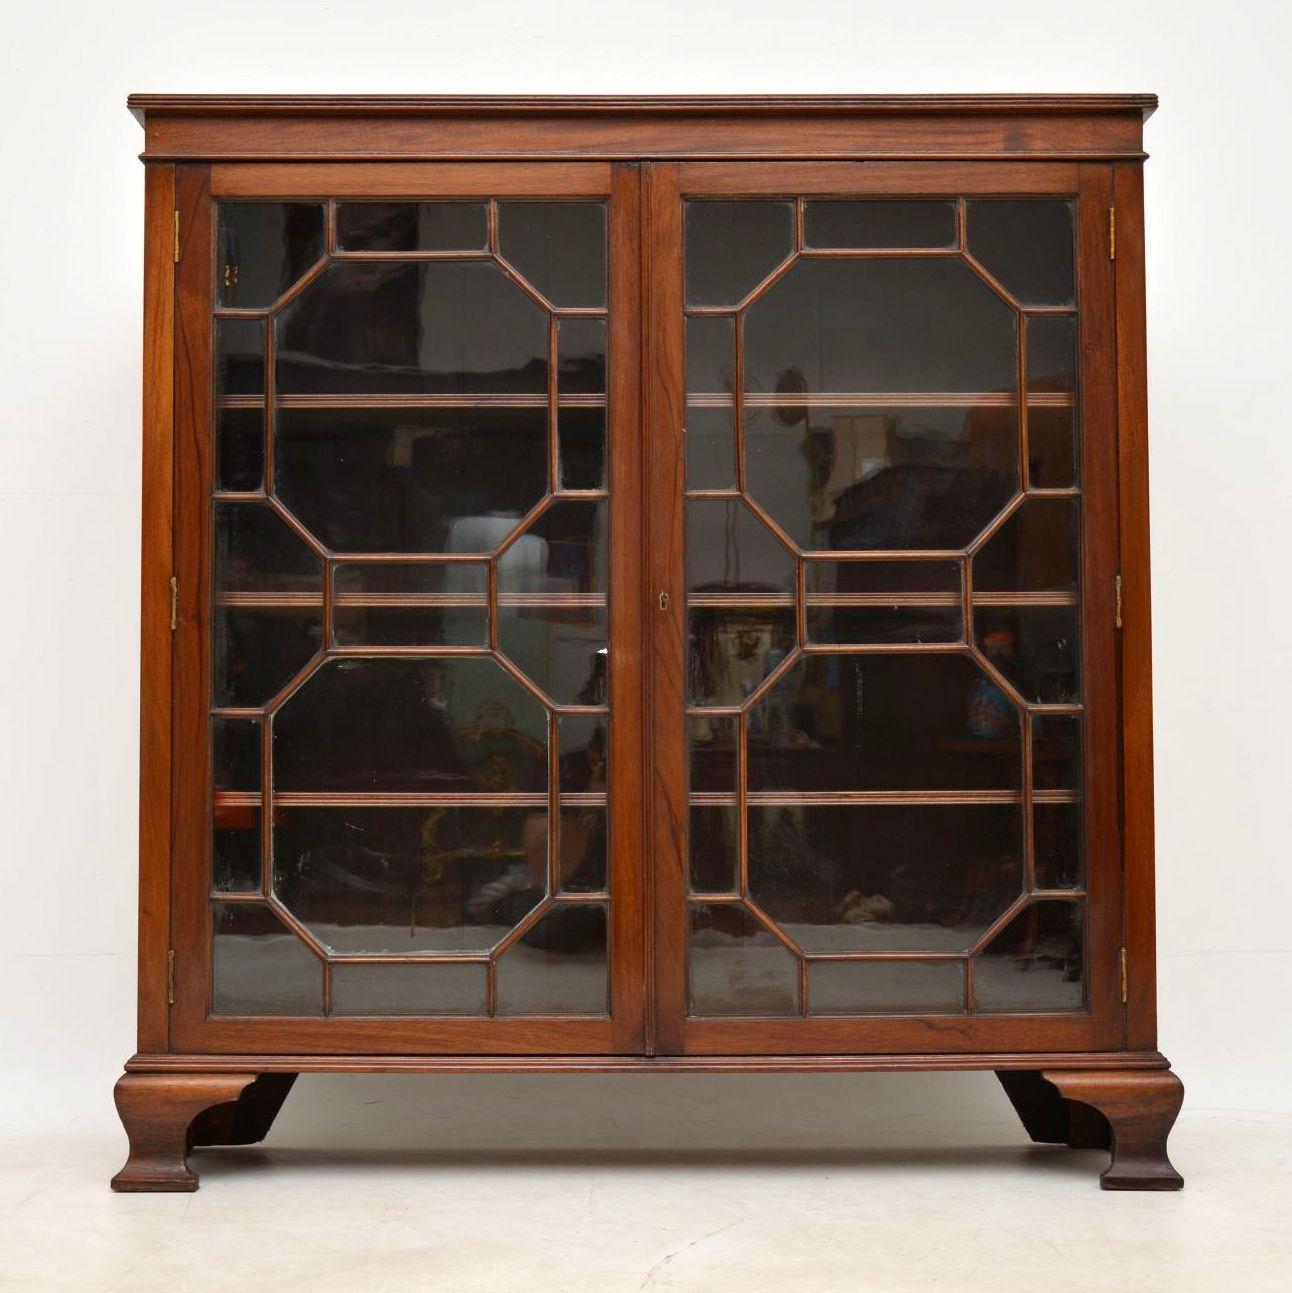 Solid mahogany antique Edwardian two-door bookcase with a reeded top edge, two astral glazed doors and sitting on bold ogee bracket feet. It’s in good original condition and has three adjustable shelves inside. This fine quality bookcase is